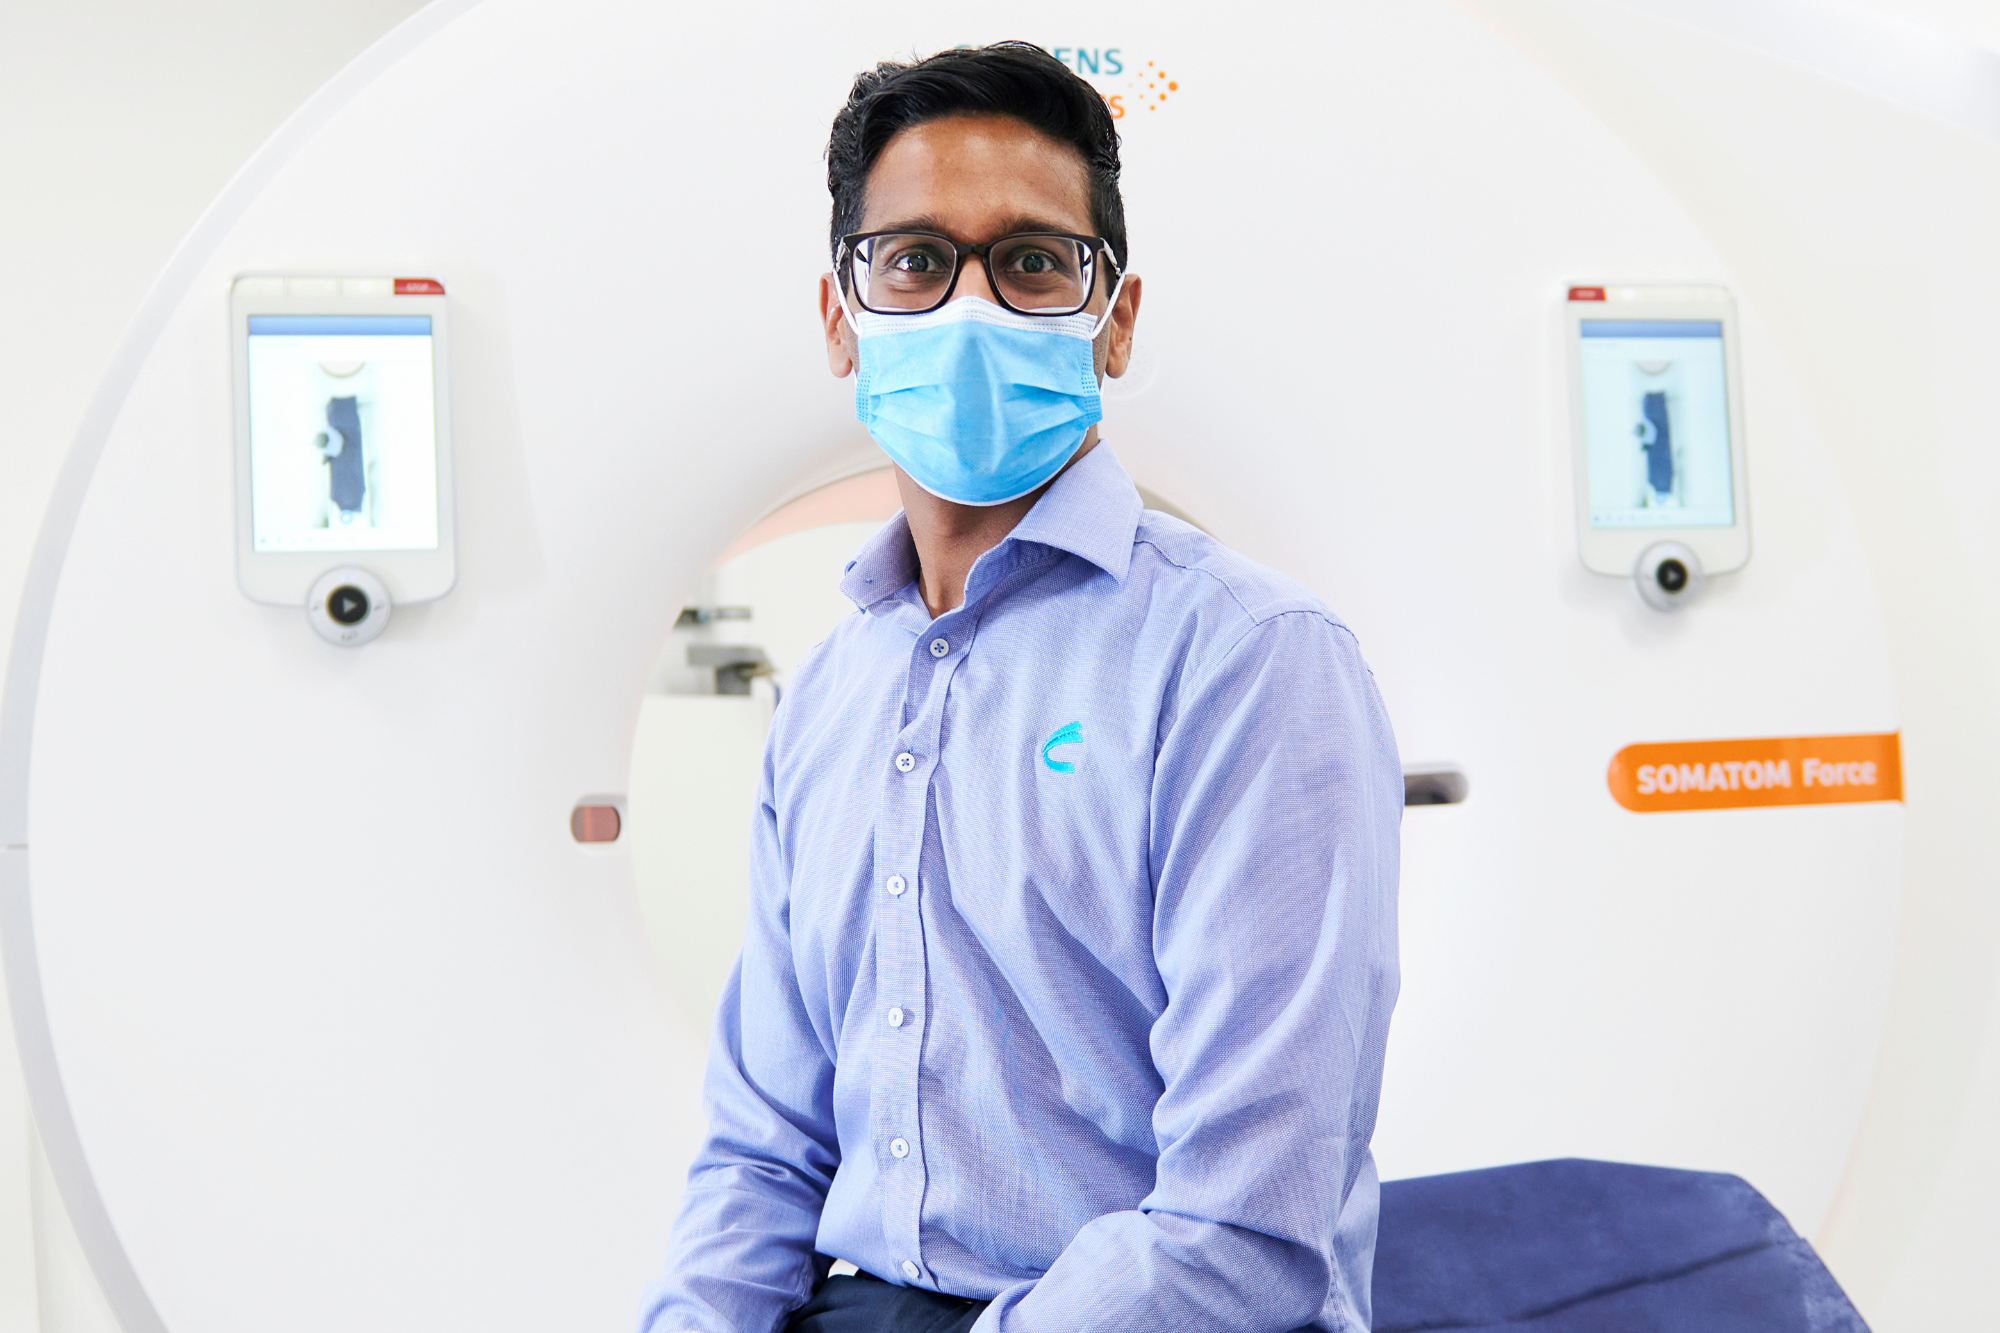 Man Wearing Face Mask to Prevent Getting Virus | Medical Imaging Center | Capital Radiology